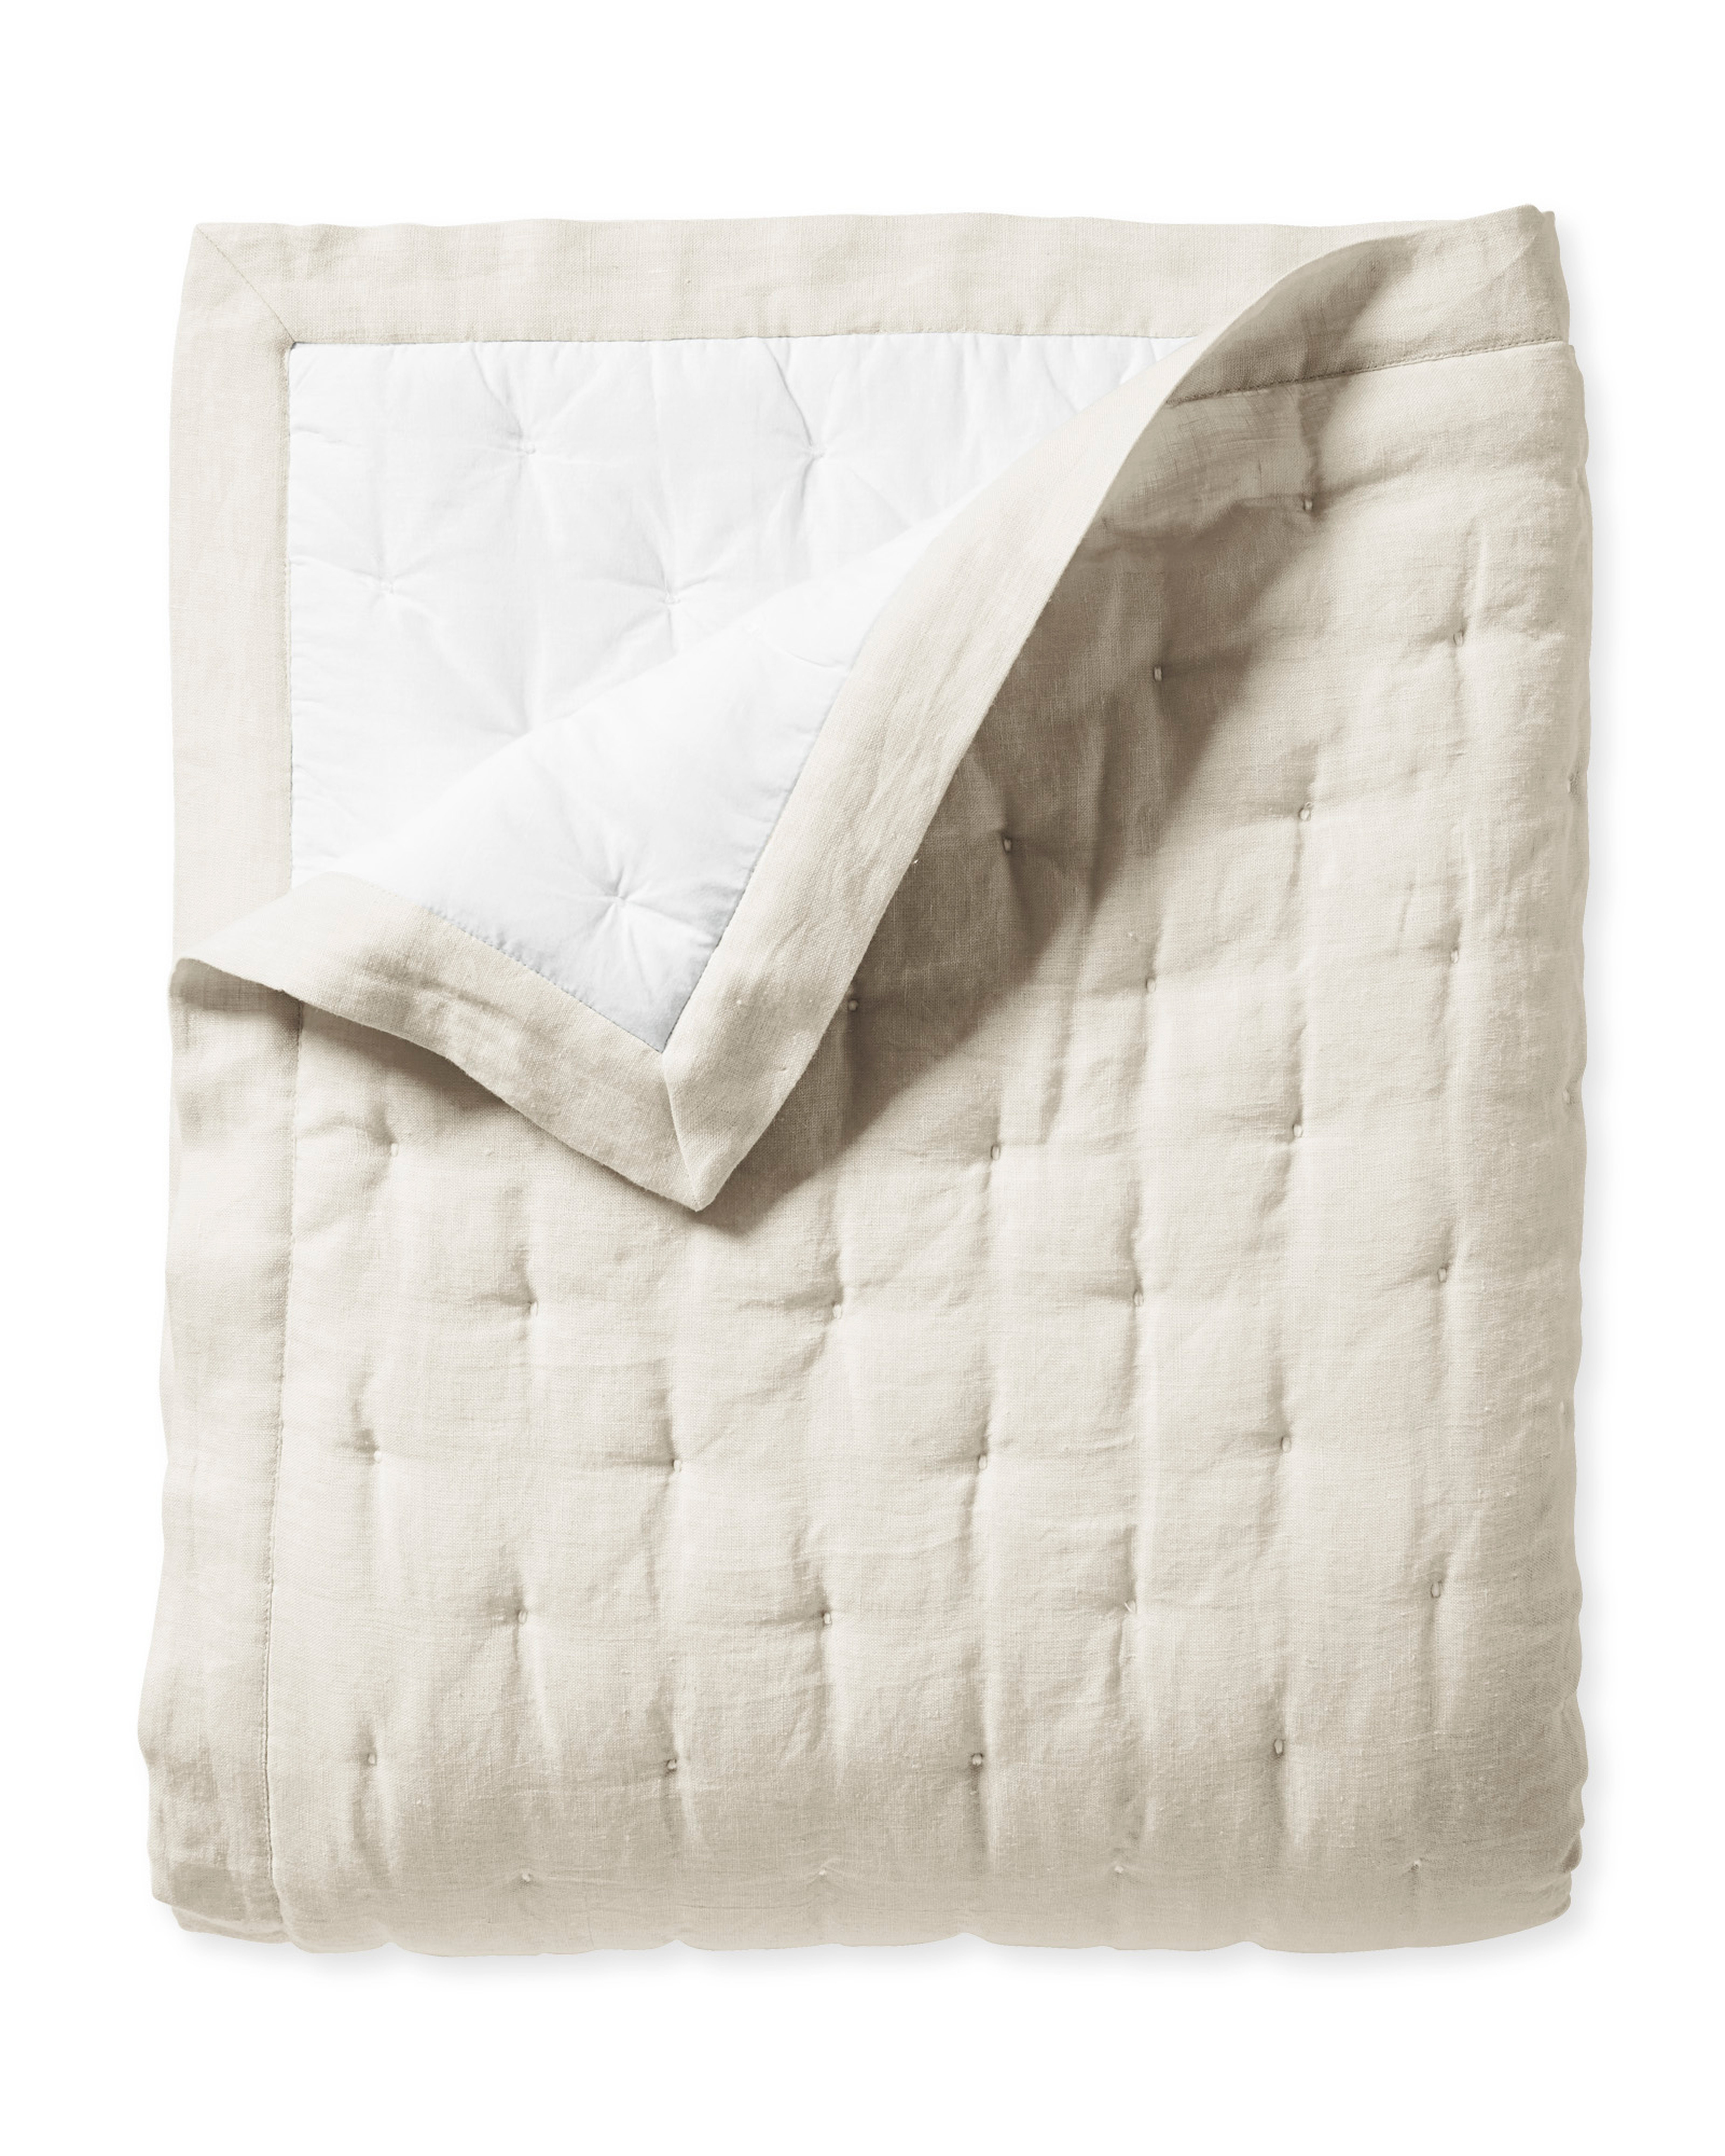 Sutter Linen King/Cal King Quilt - Flax - Polyester Fill - Serena and Lily